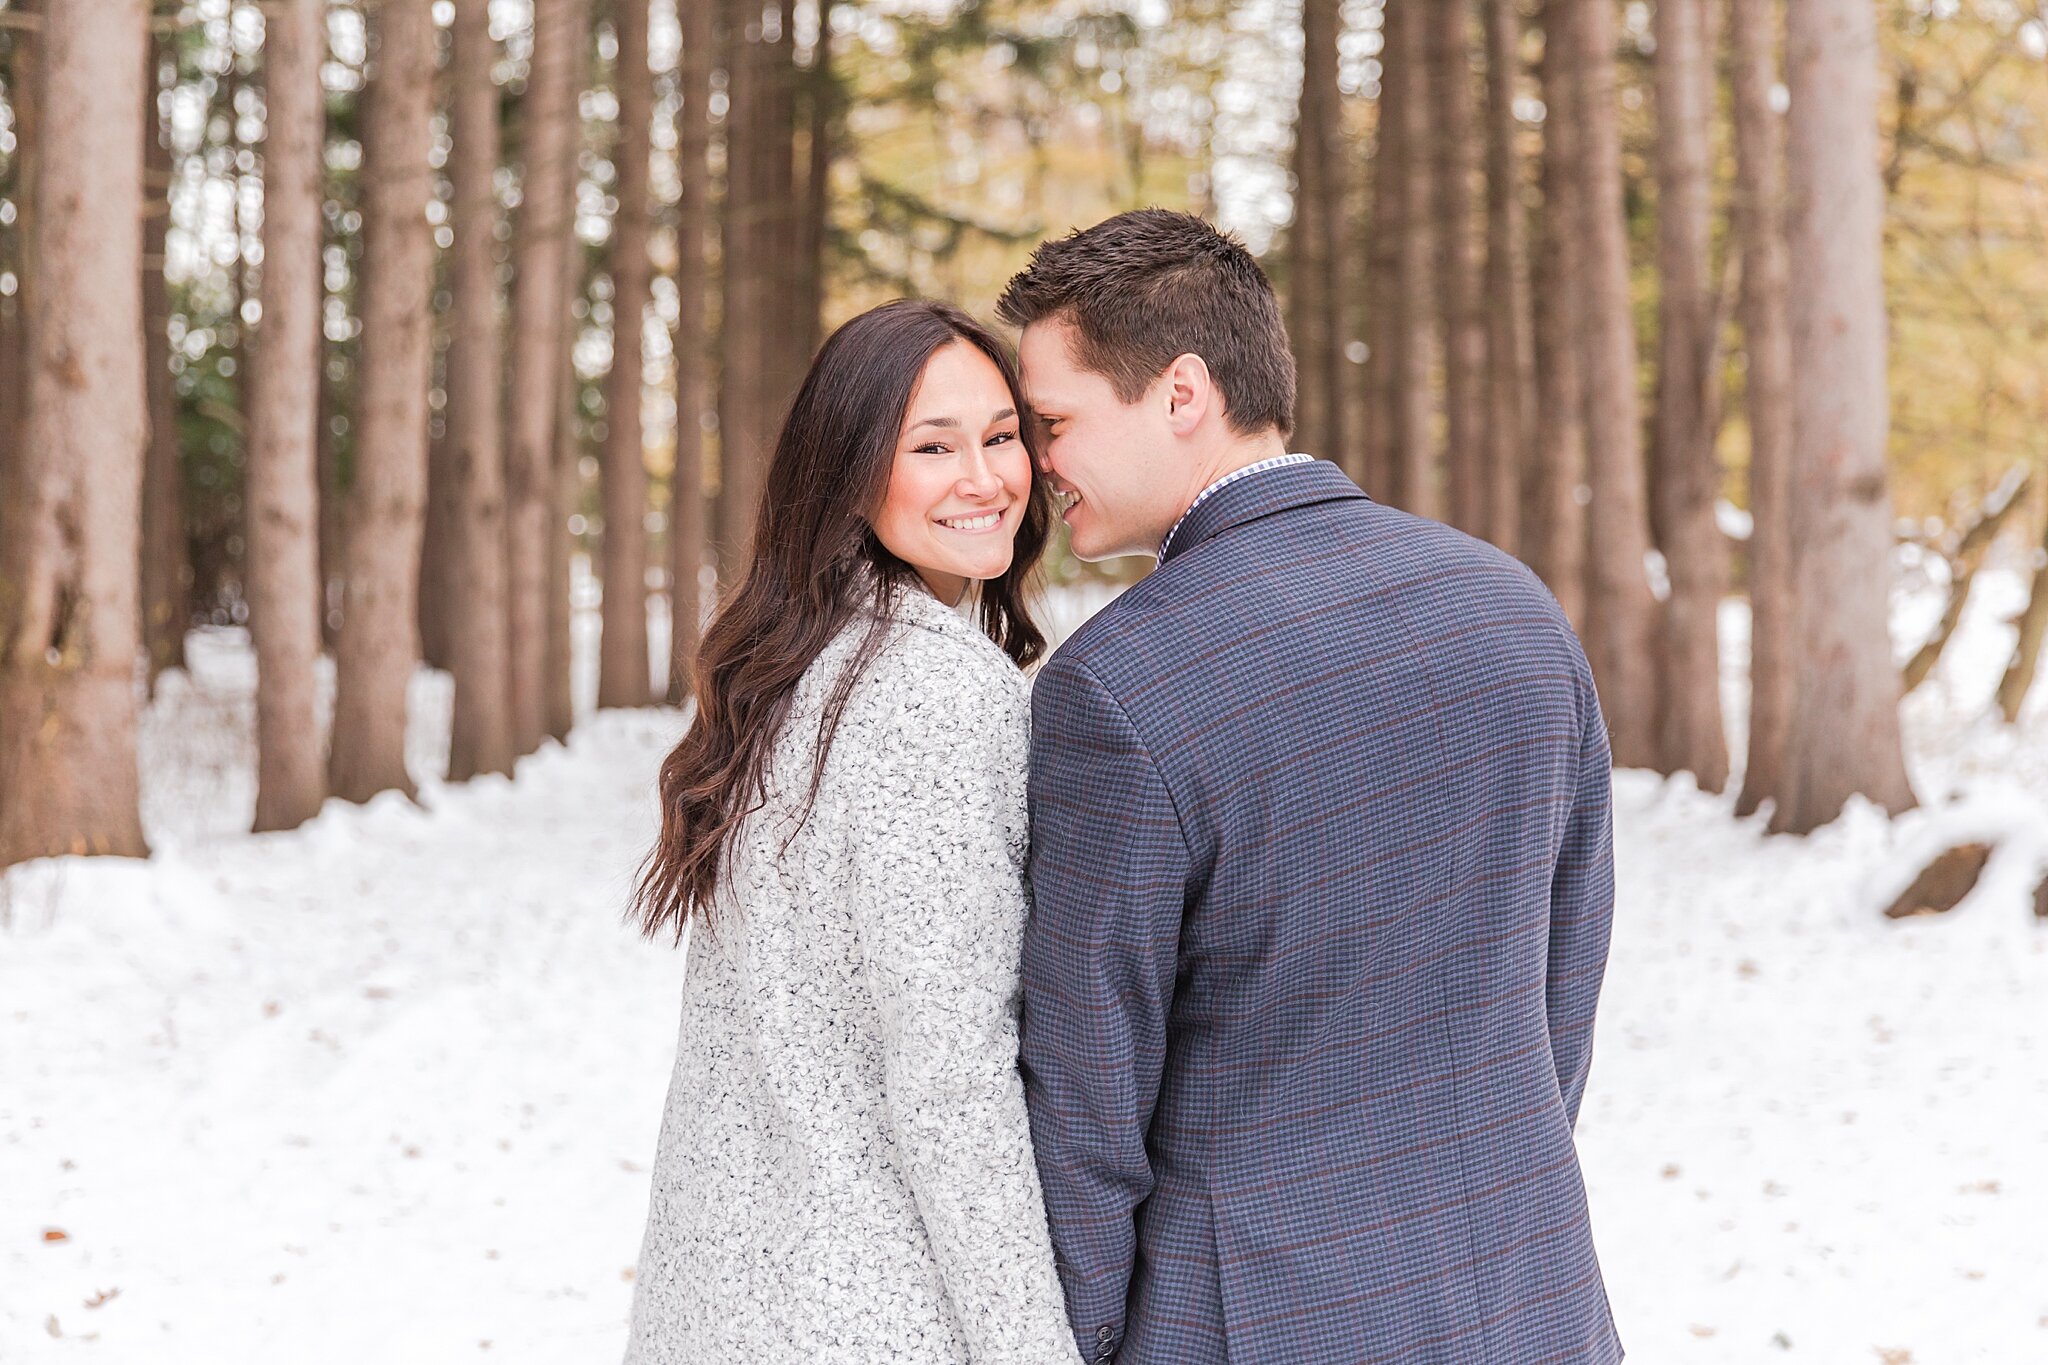 detroit-wedding-photographer-winter-engagement-photos-at-stony-creek-metropark-in-shelby-twp-mi-by-courtney-carolyn-photography_0010.jpg